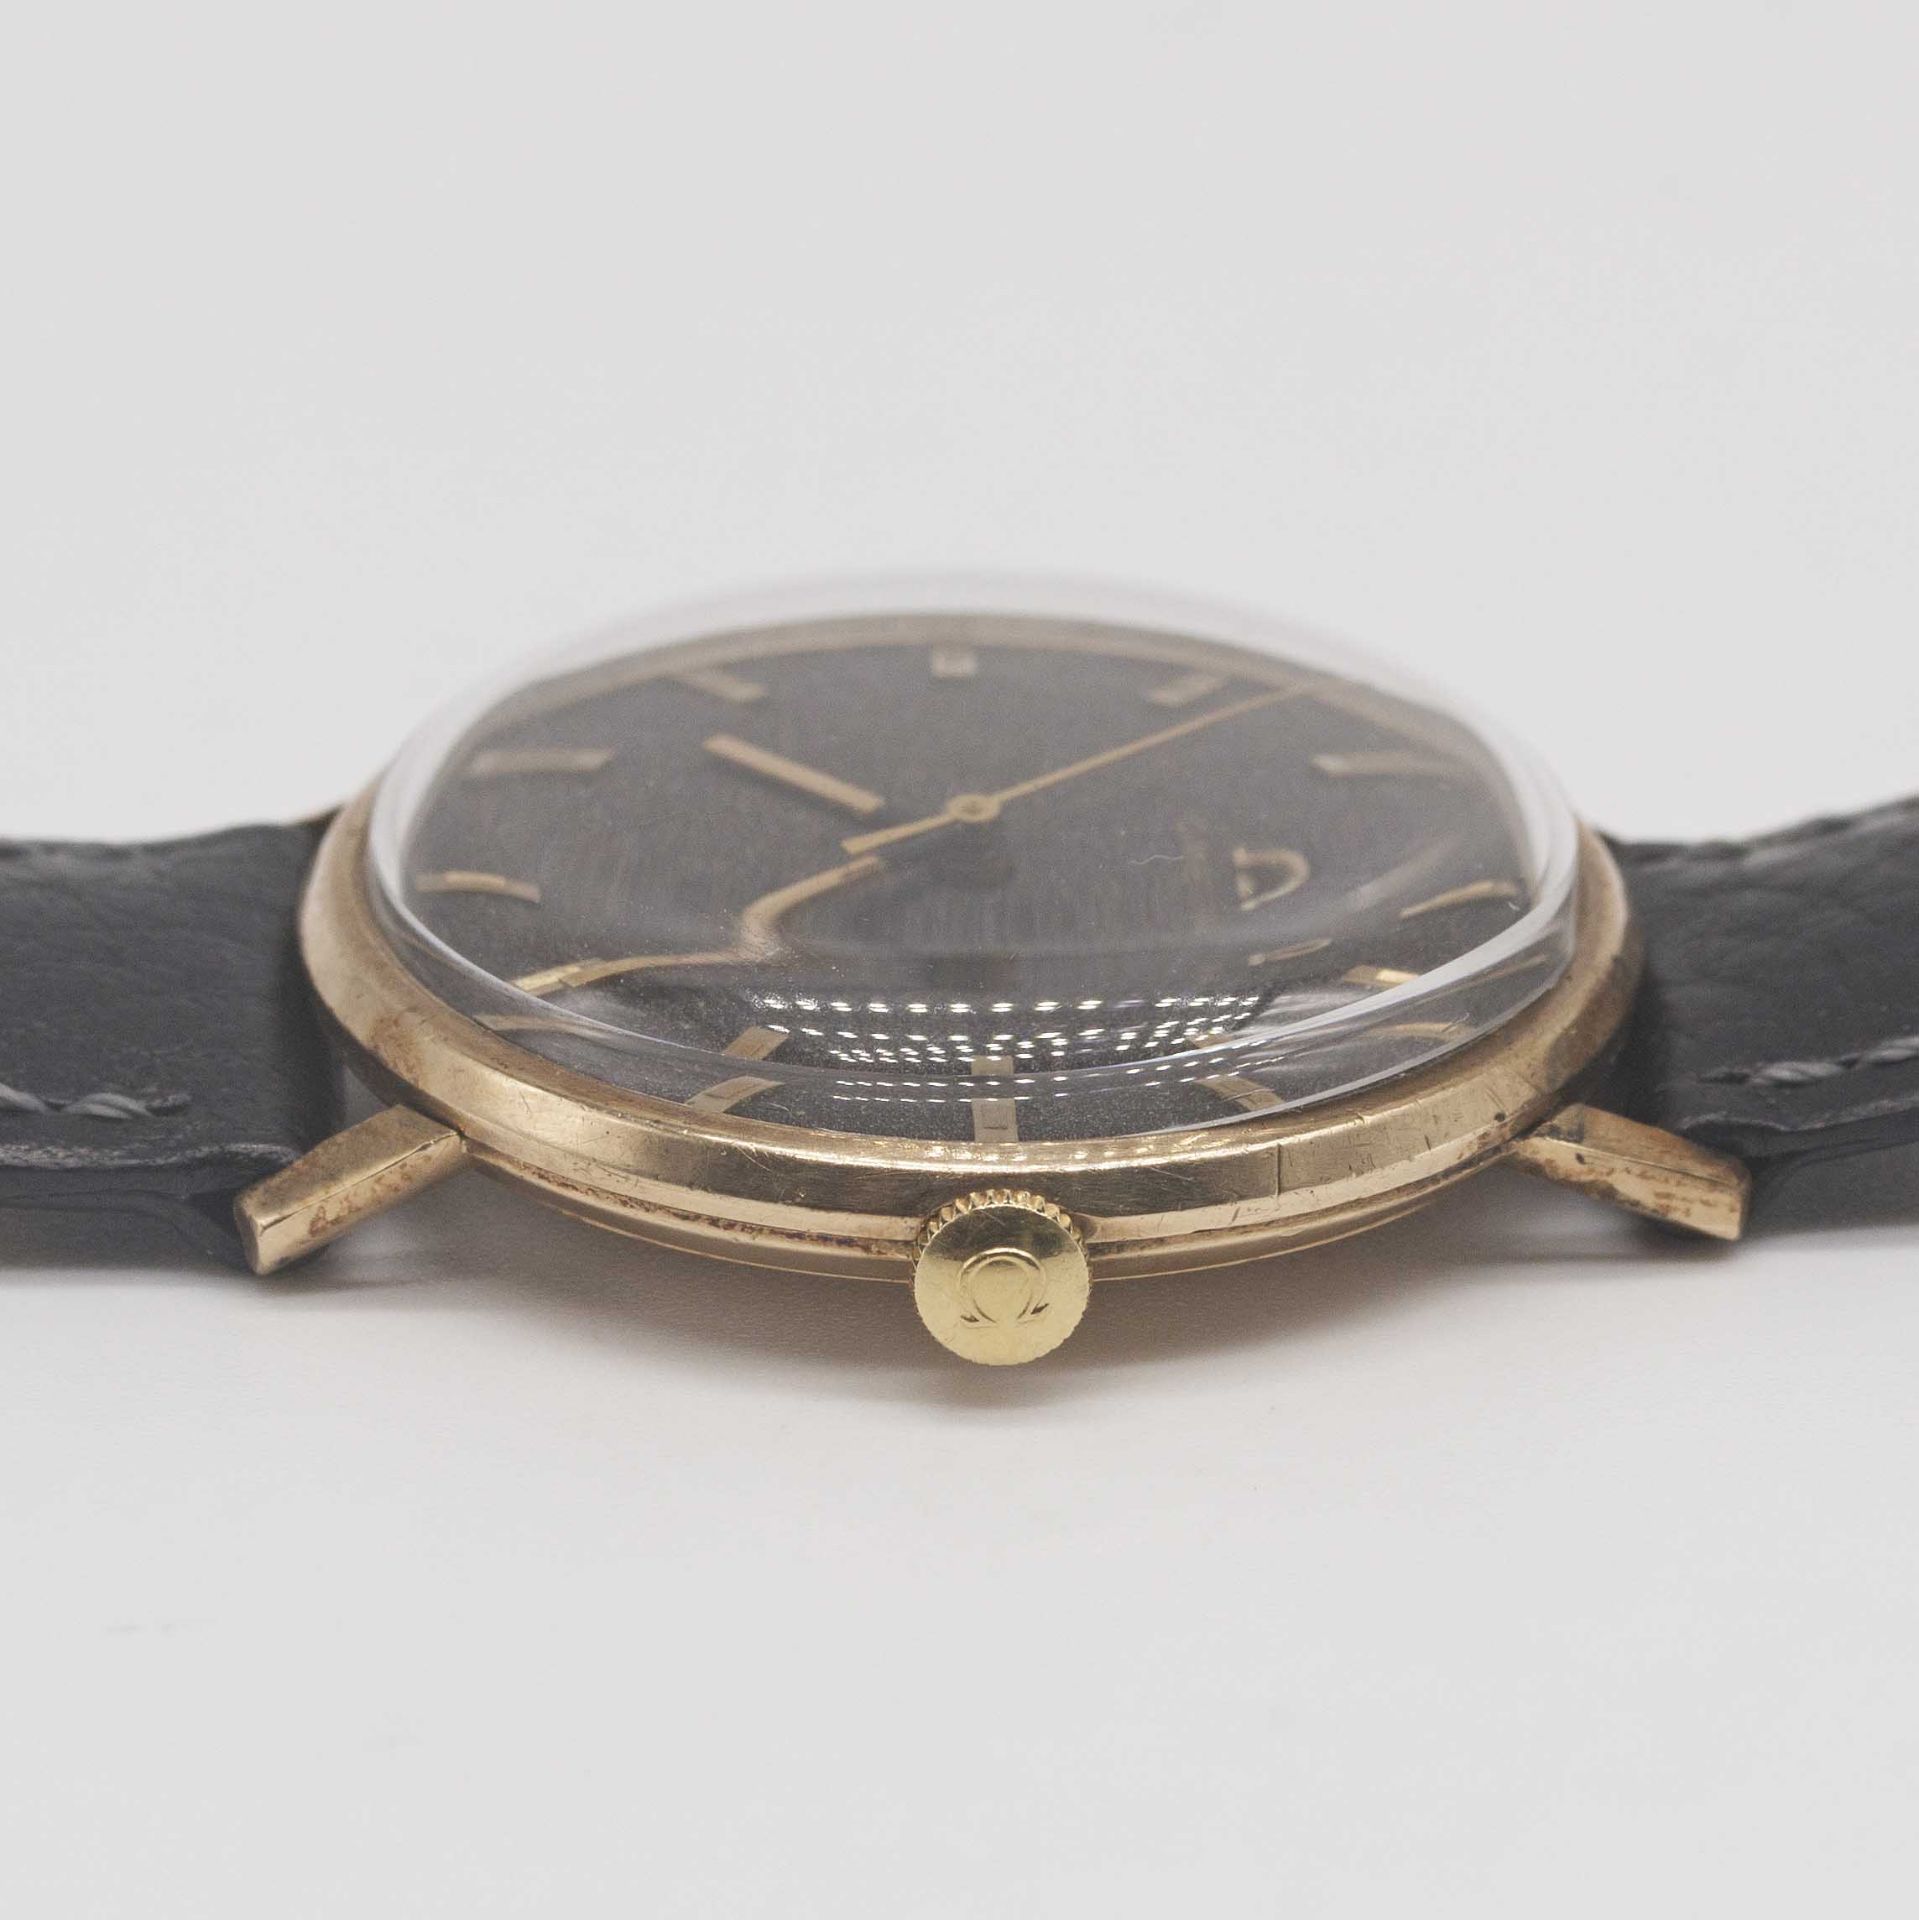 A GENTLEMAN'S 9CT SOLID GOLD OMEGA WRIST WATCH CIRCA 1960s, WITH GREY DIAL Movement: Manual wind, - Image 7 of 8